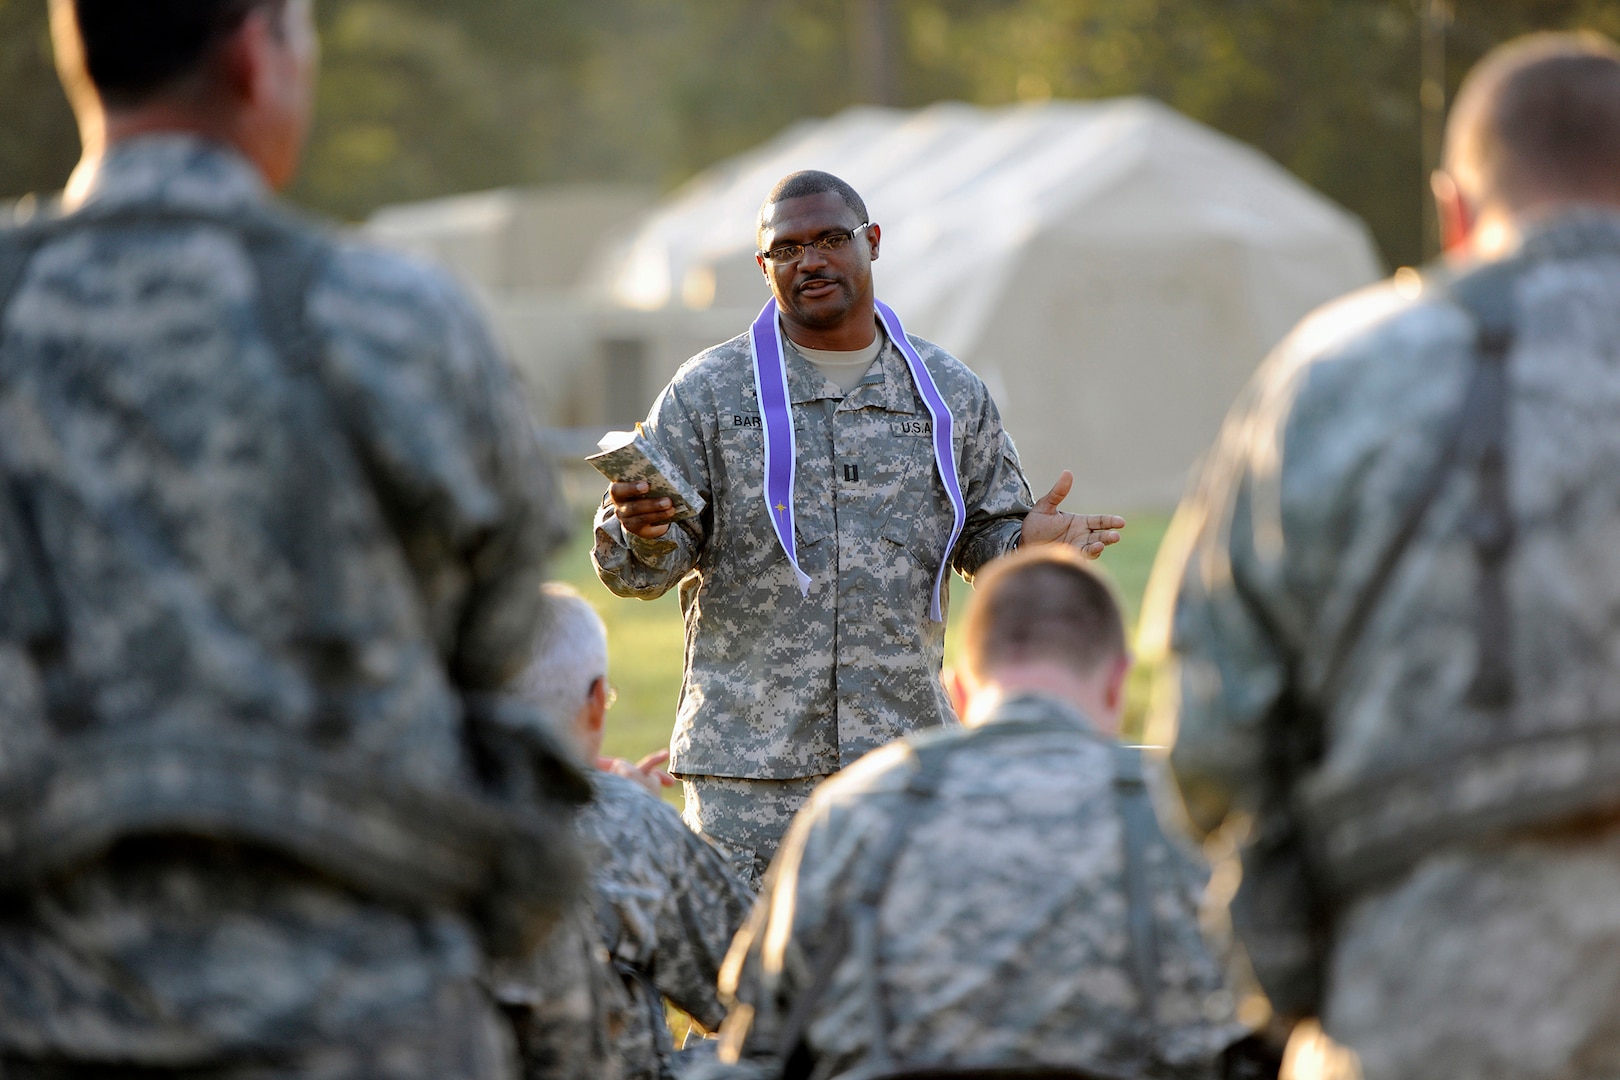 Army Capt. Antoine D. Barlow, a chaplain with the Mississippi Army National Guard’s 155th Heavy Brigade Combat Team, conducts chapel service during the unit's annual training at Camp Shelby Joint Forces Training Center, Mississippi, Aug. 12, 2012. Army National Guard chaplains not only act as spiritual and religious leaders for Soldiers, but are now involved with behavioral health and family support programs designed to aid Soldiers who may need additional assistance. 